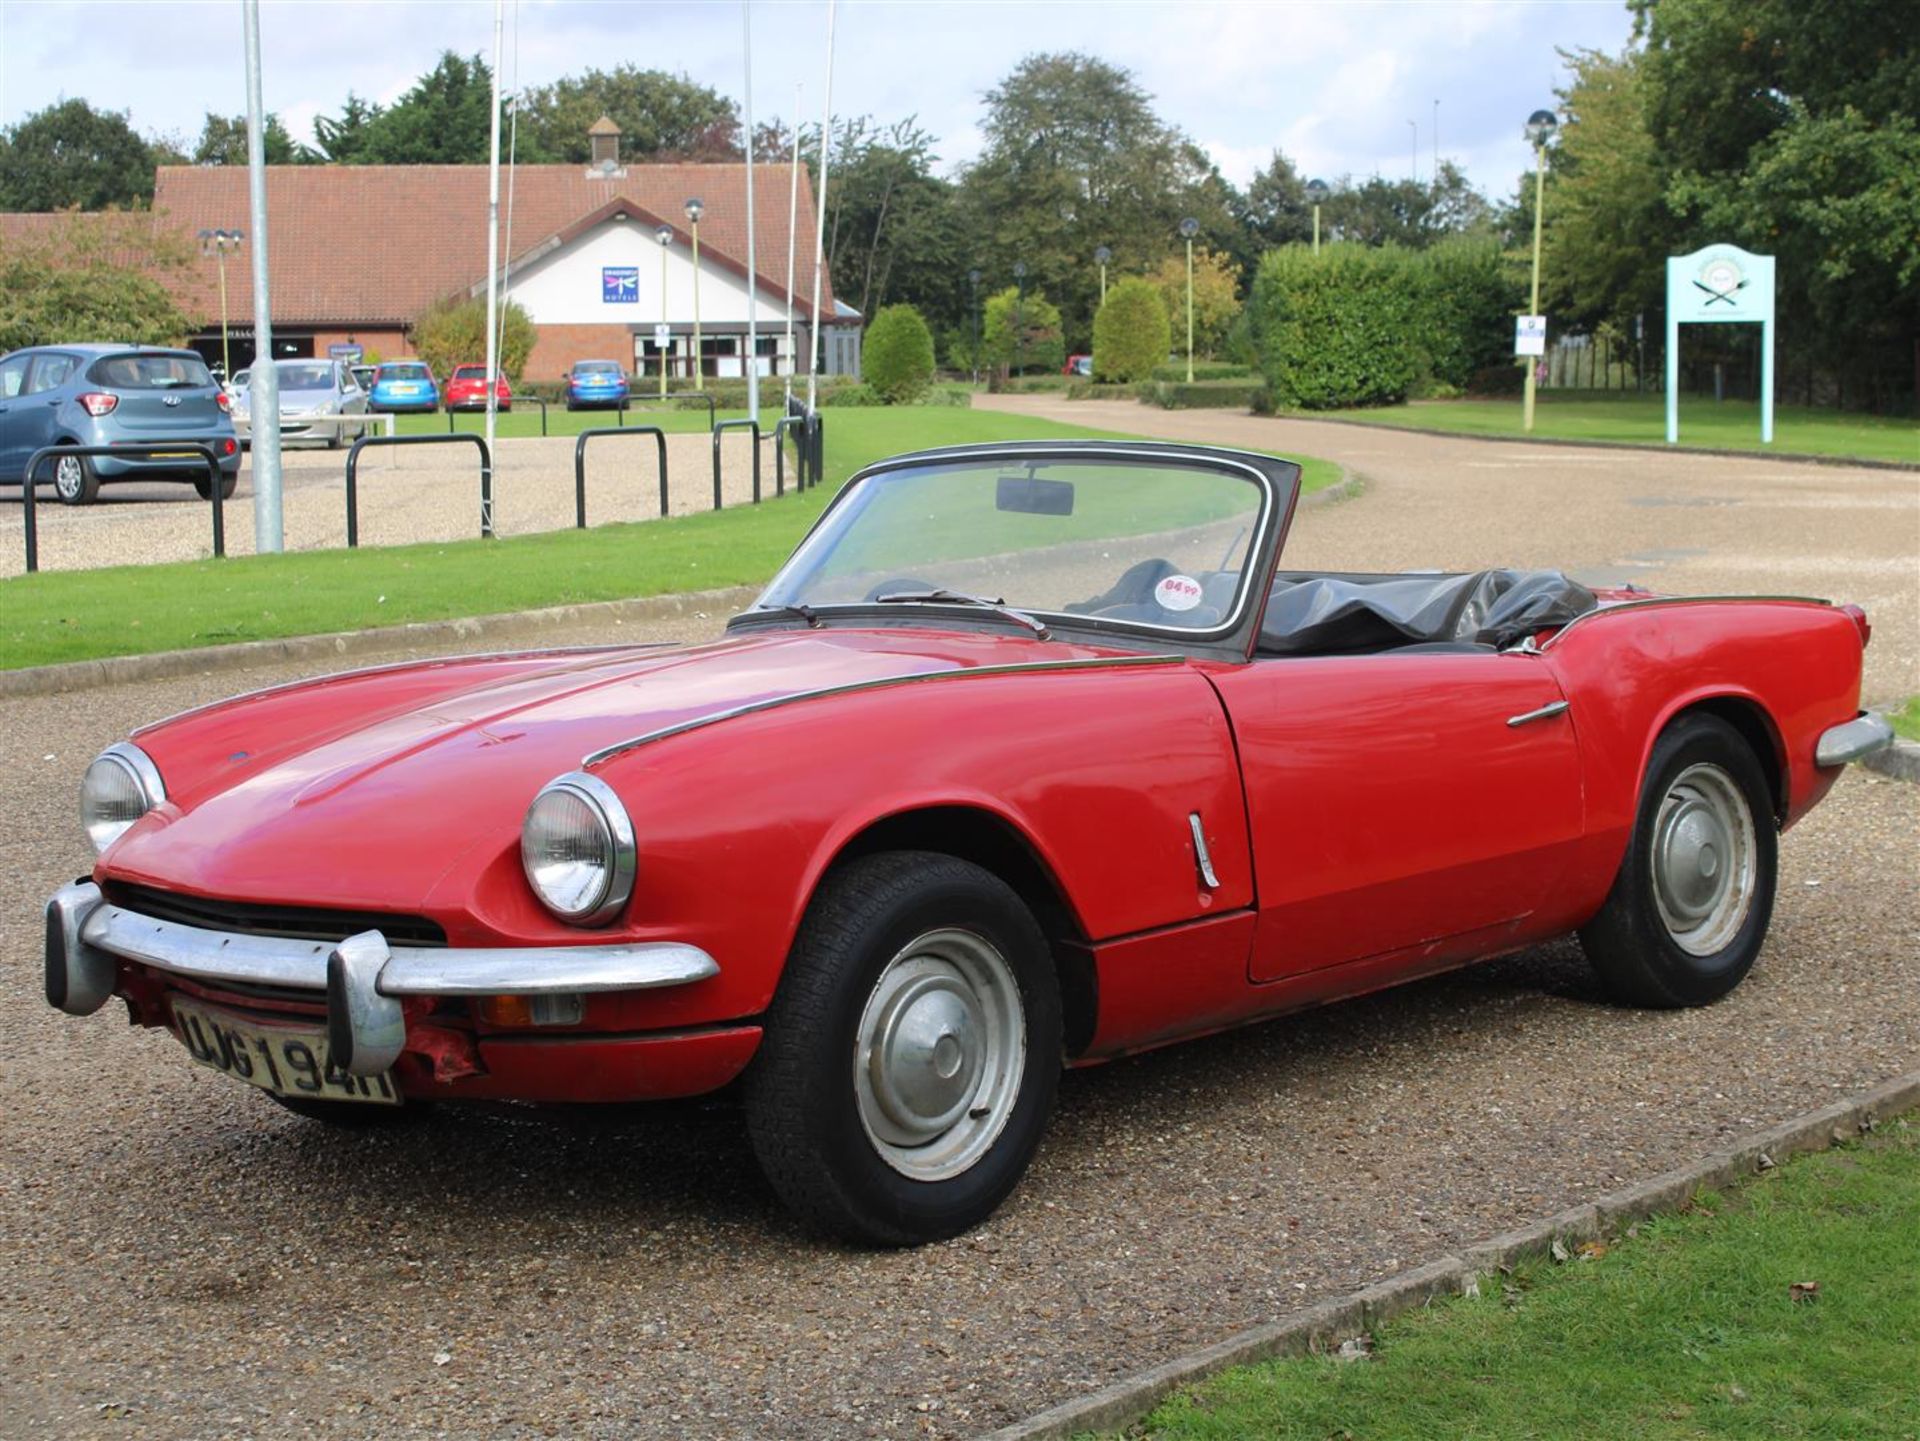 1970 Triumph Spitfire MKIII - Image 5 of 15